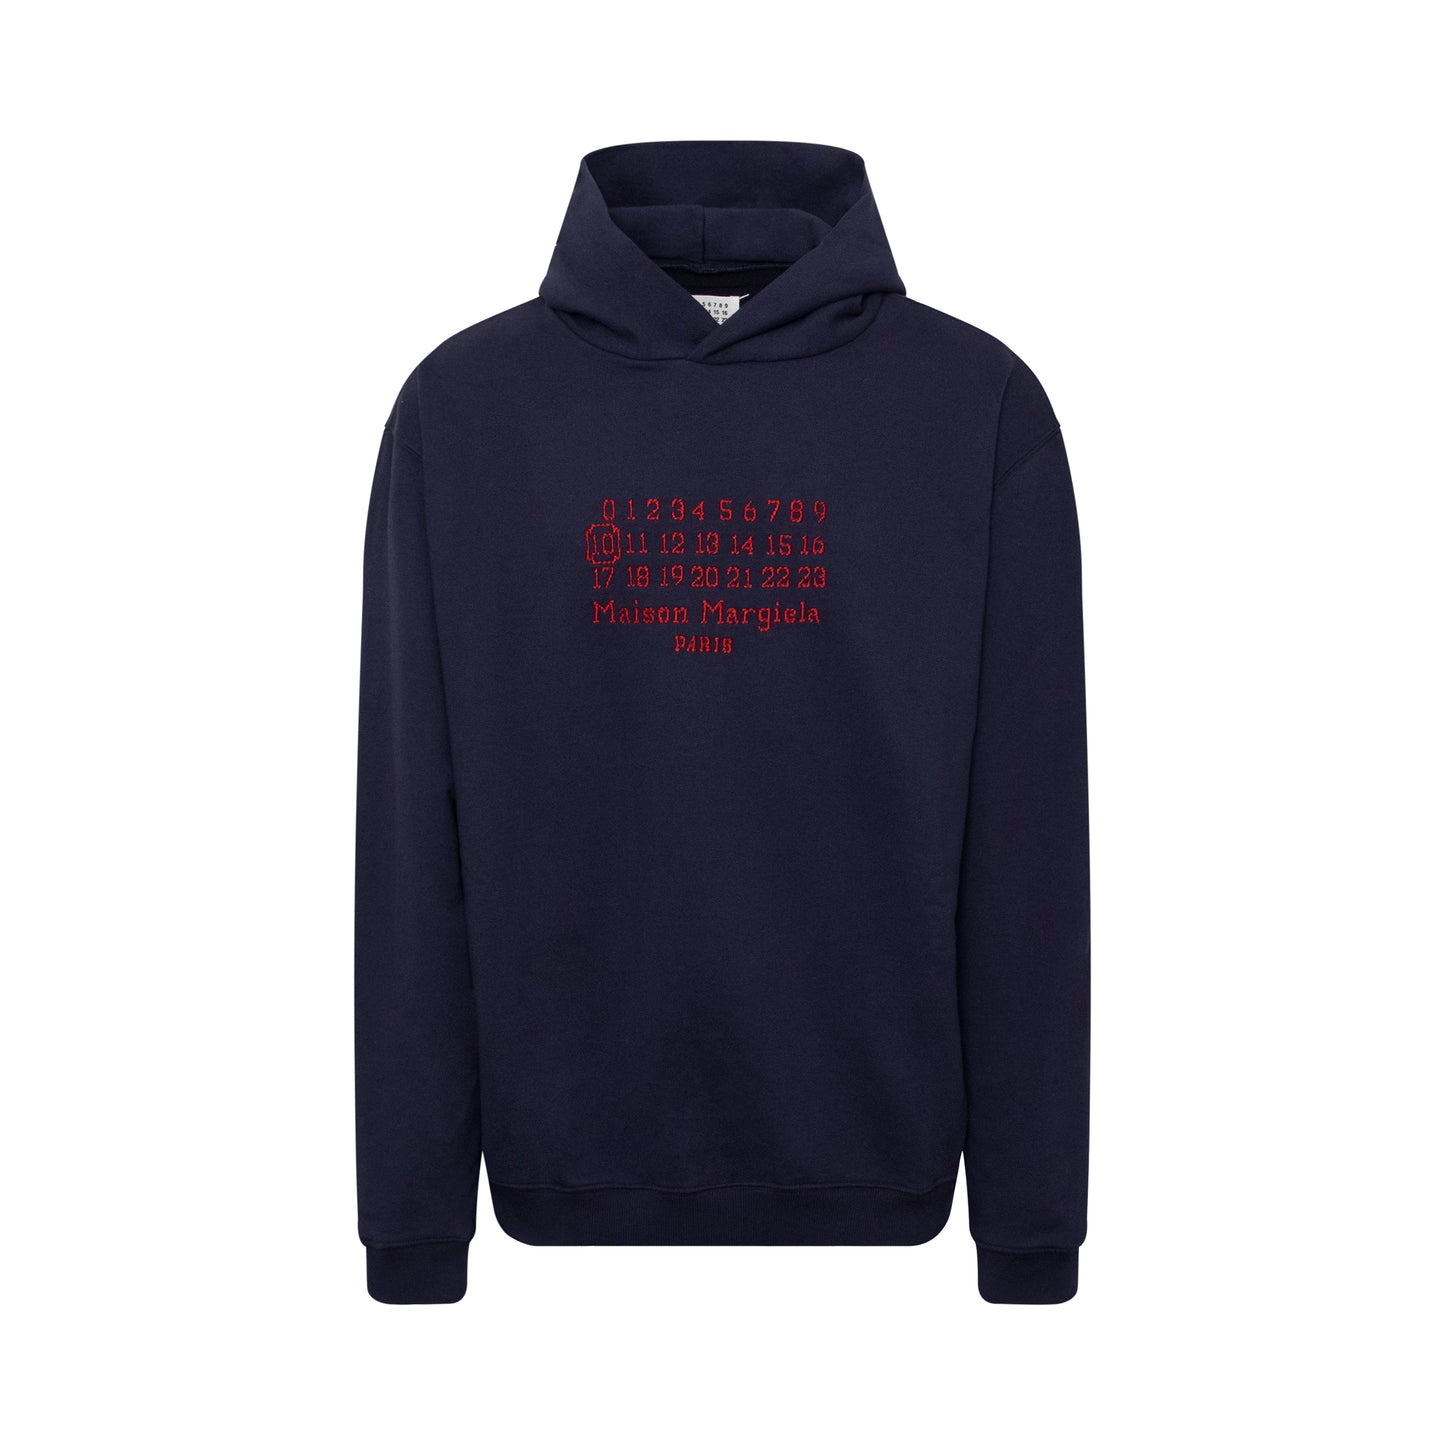 Embroidered Logo Hoodie in Indigo